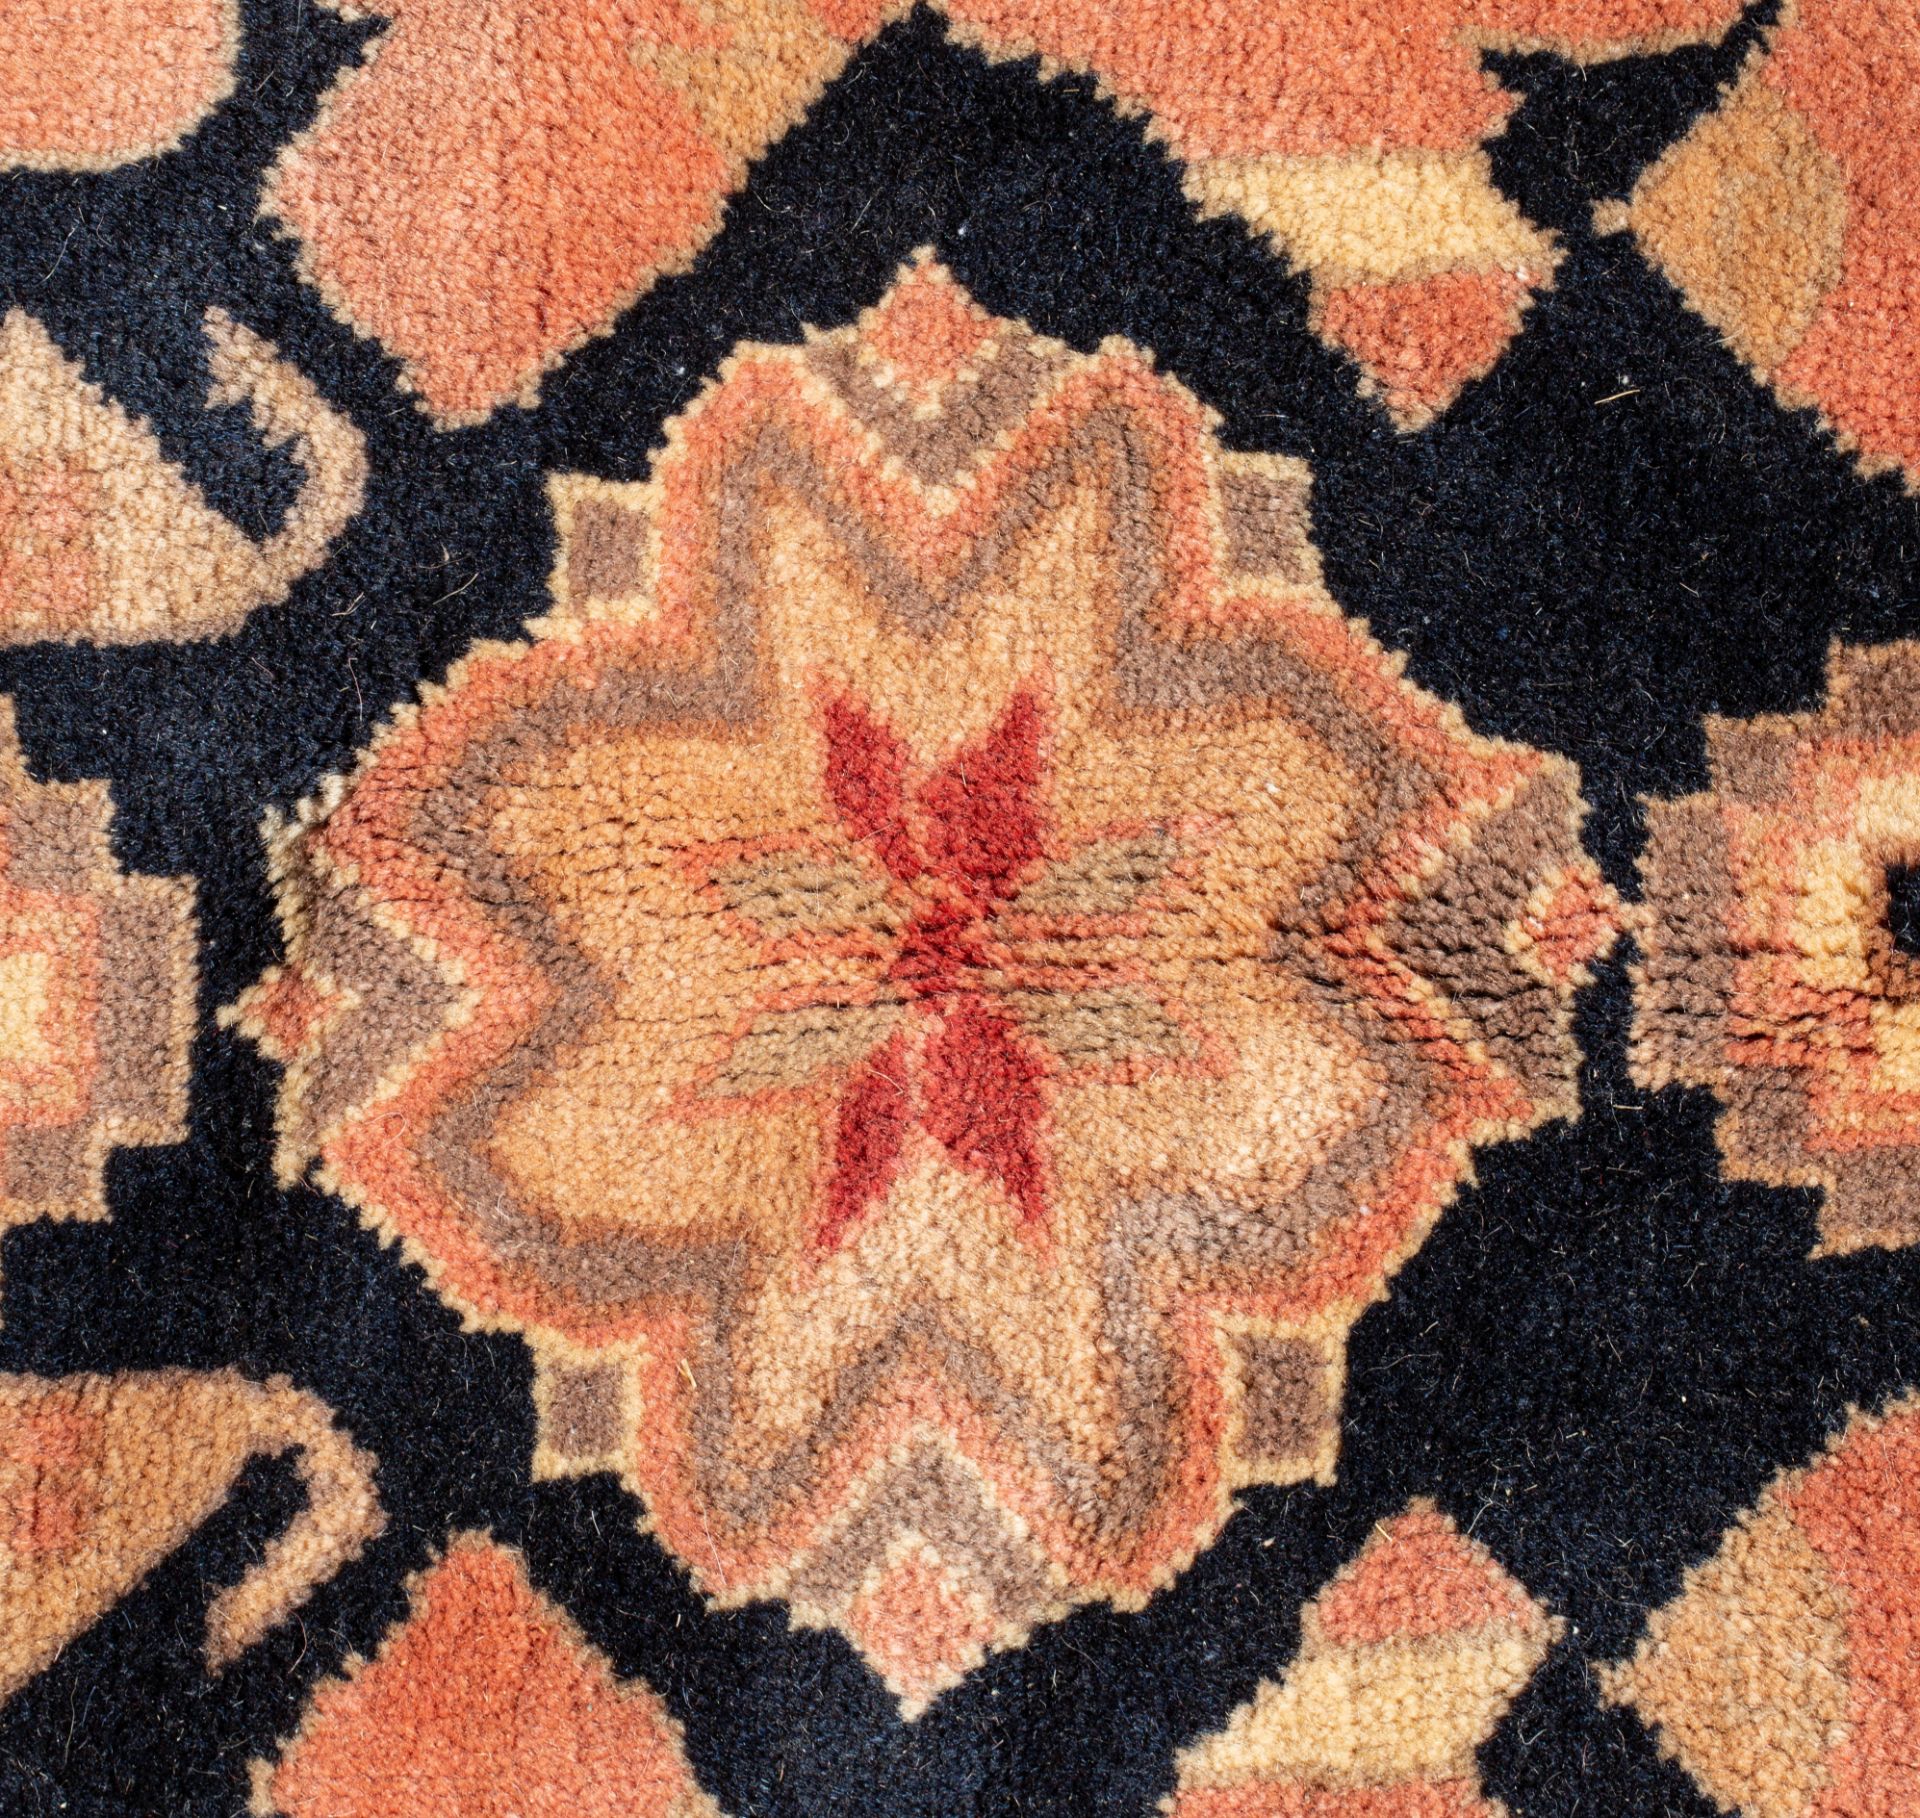 A LARGE ROMANIAN AREA RUG, 20TH CENTURY - Image 4 of 6